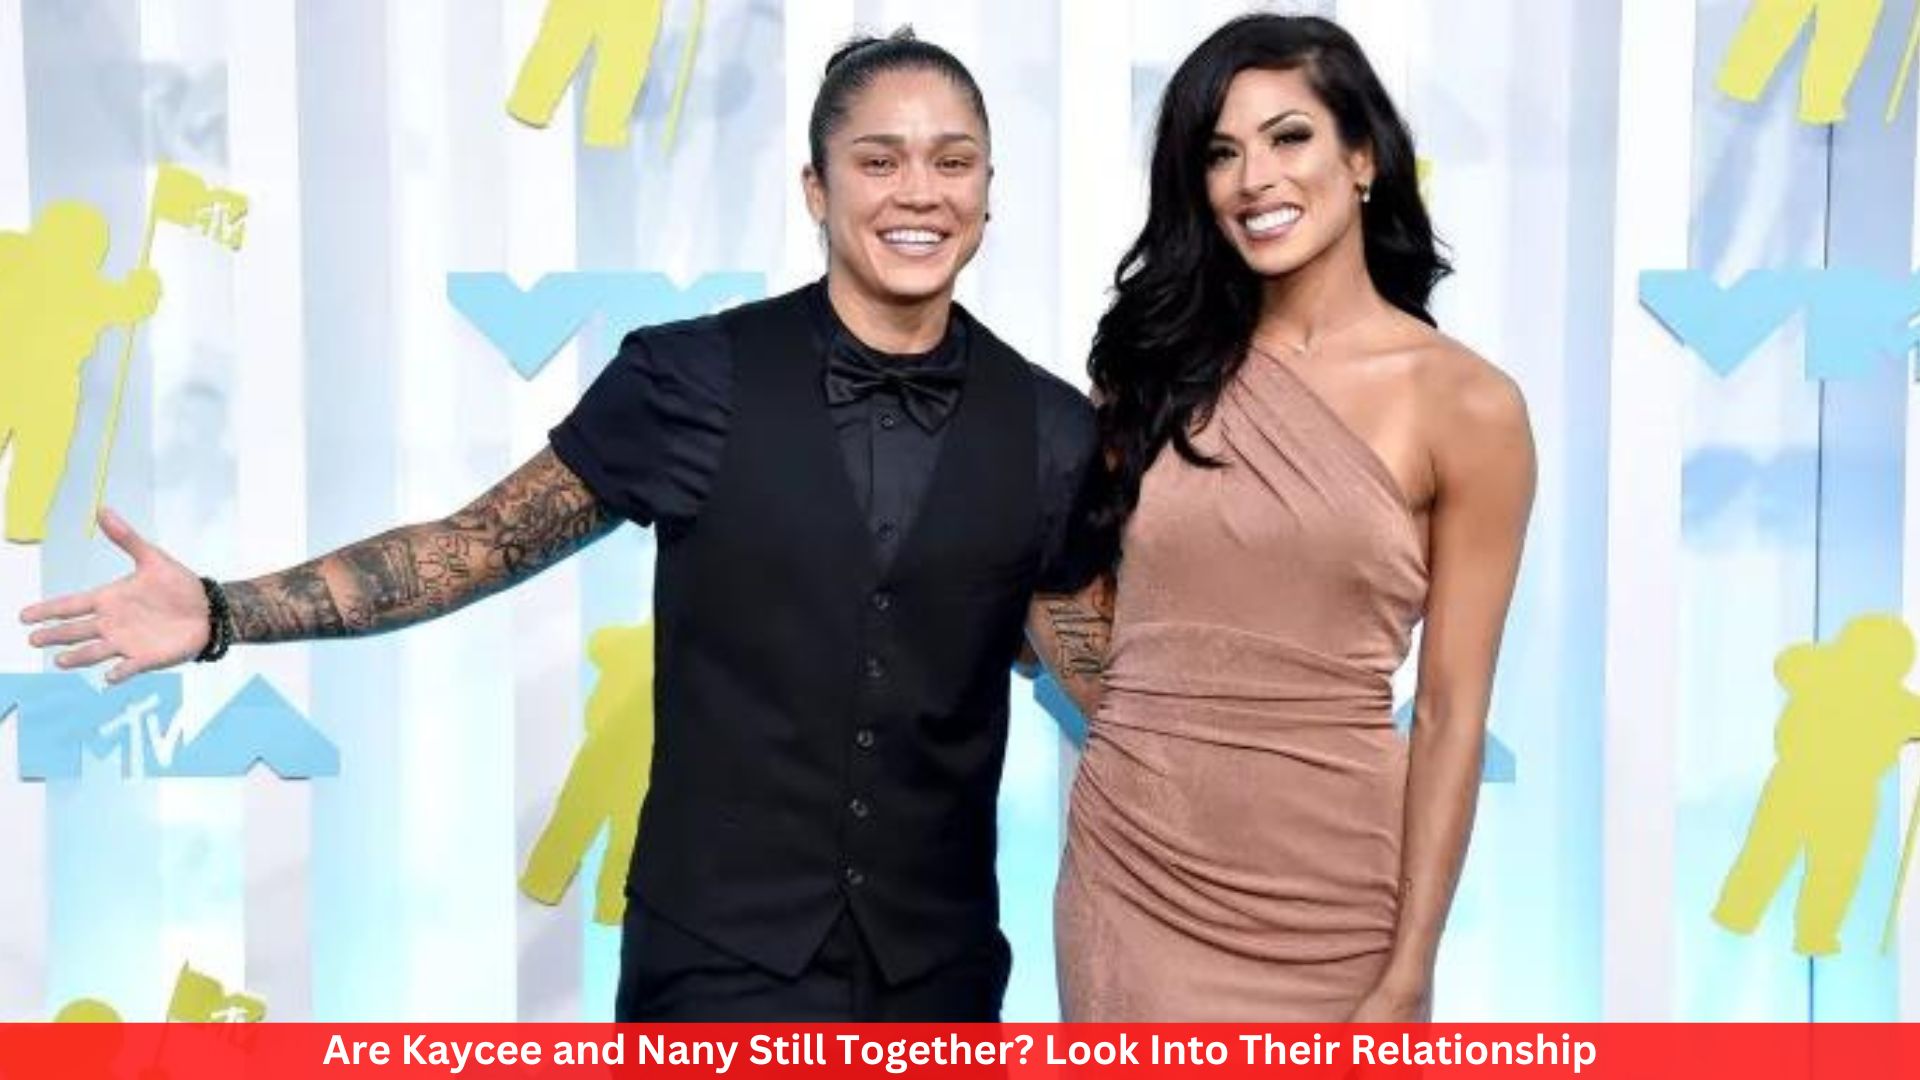 Are Kaycee and Nany Still Together? Look Into Their Relationship